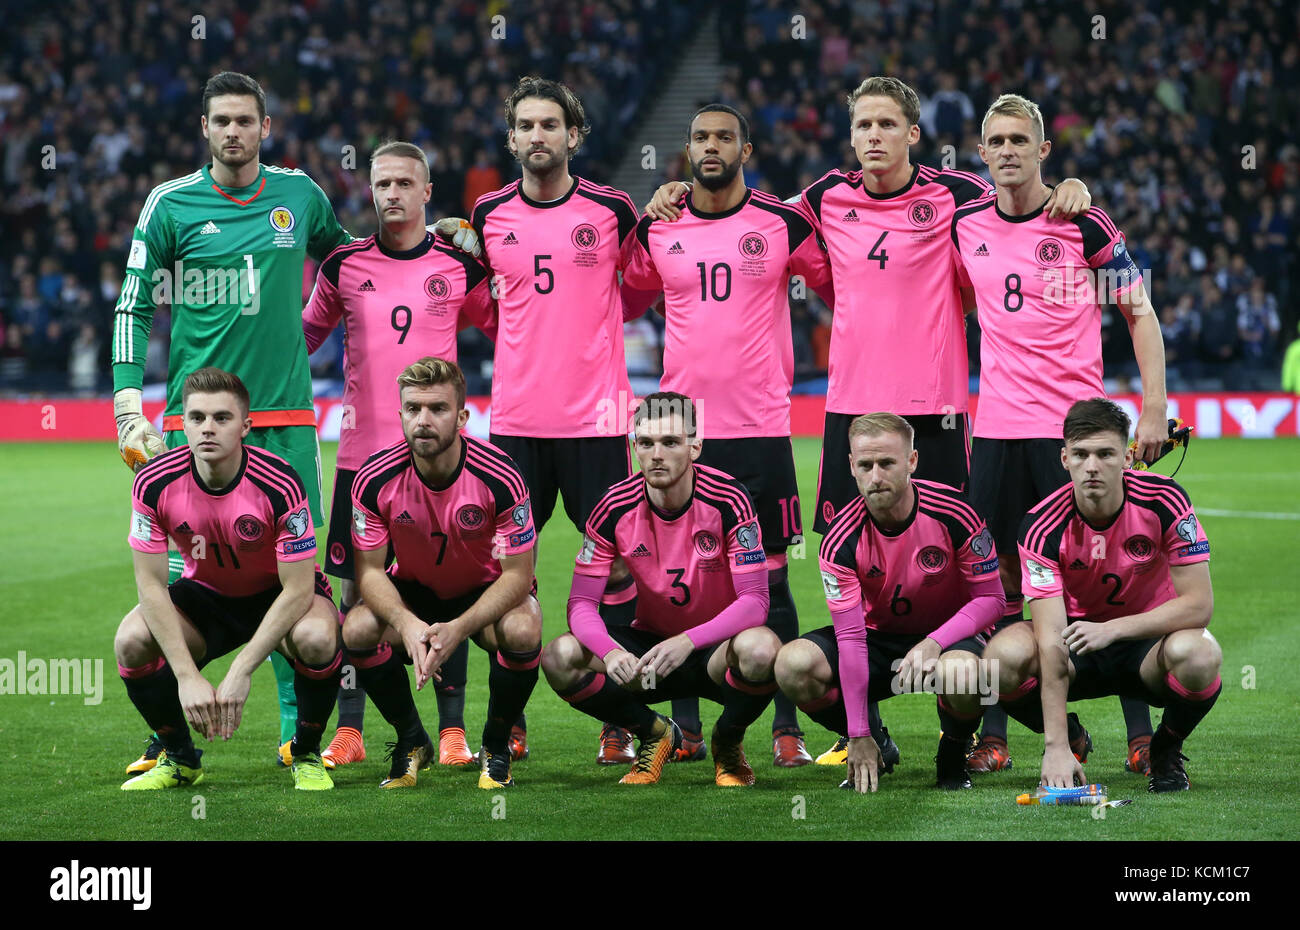 Scotland team group (top row, from left to right) goalkeeper Craig Gordon, Leigh Griffiths, Charlie Mulgrew, Matt Phillips, Christophe Berra and Darren Fletcher (bottom row, from left to right) James Forrest, James Morrison, Andrew Robertson, Barry Bannan and Kieran Tierney during the 2018 FIFA World Cup Qualifying, Group F match at Hampden Park, Glasgow. PRESS ASSOCIATION Photo. Picture date: Thursday October 5, 2017. See PA story soccer Scotland. Photo credit should read: Jane Barlow/PA Wire. Stock Photo